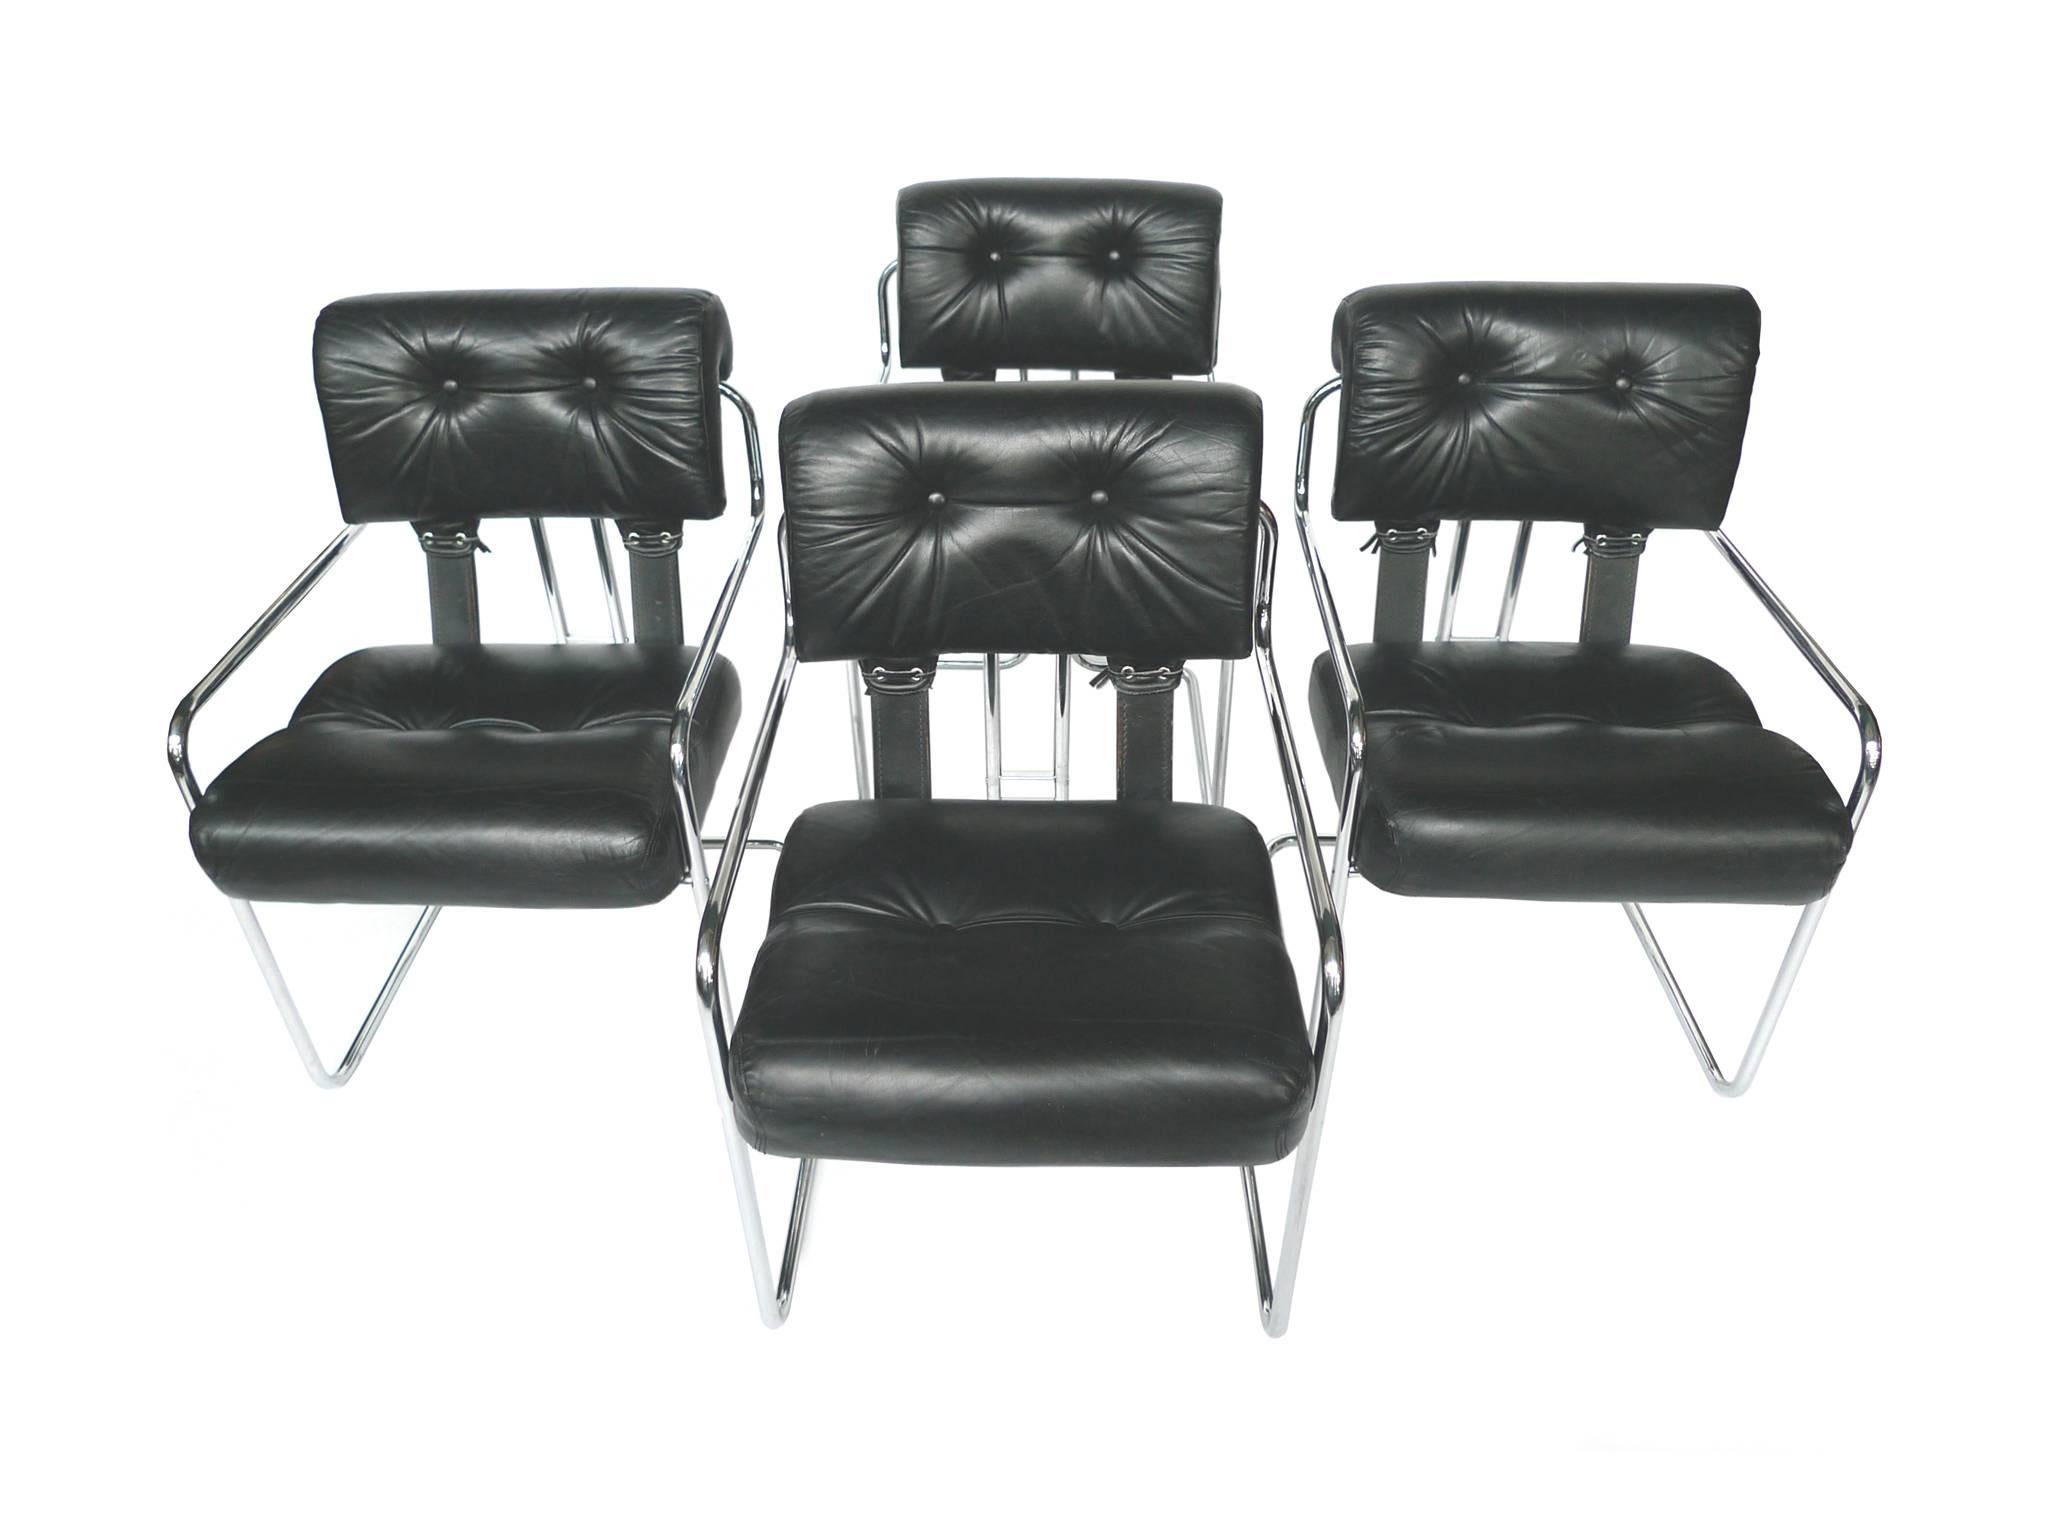 This set of four Italian dining chairs is designed by Guido Faleschini for the Pace collection. The chairs are upholstered in tufted, black leather, secured with leather straps at the back. The frame is tubular chrome. Faleschini's chairs are